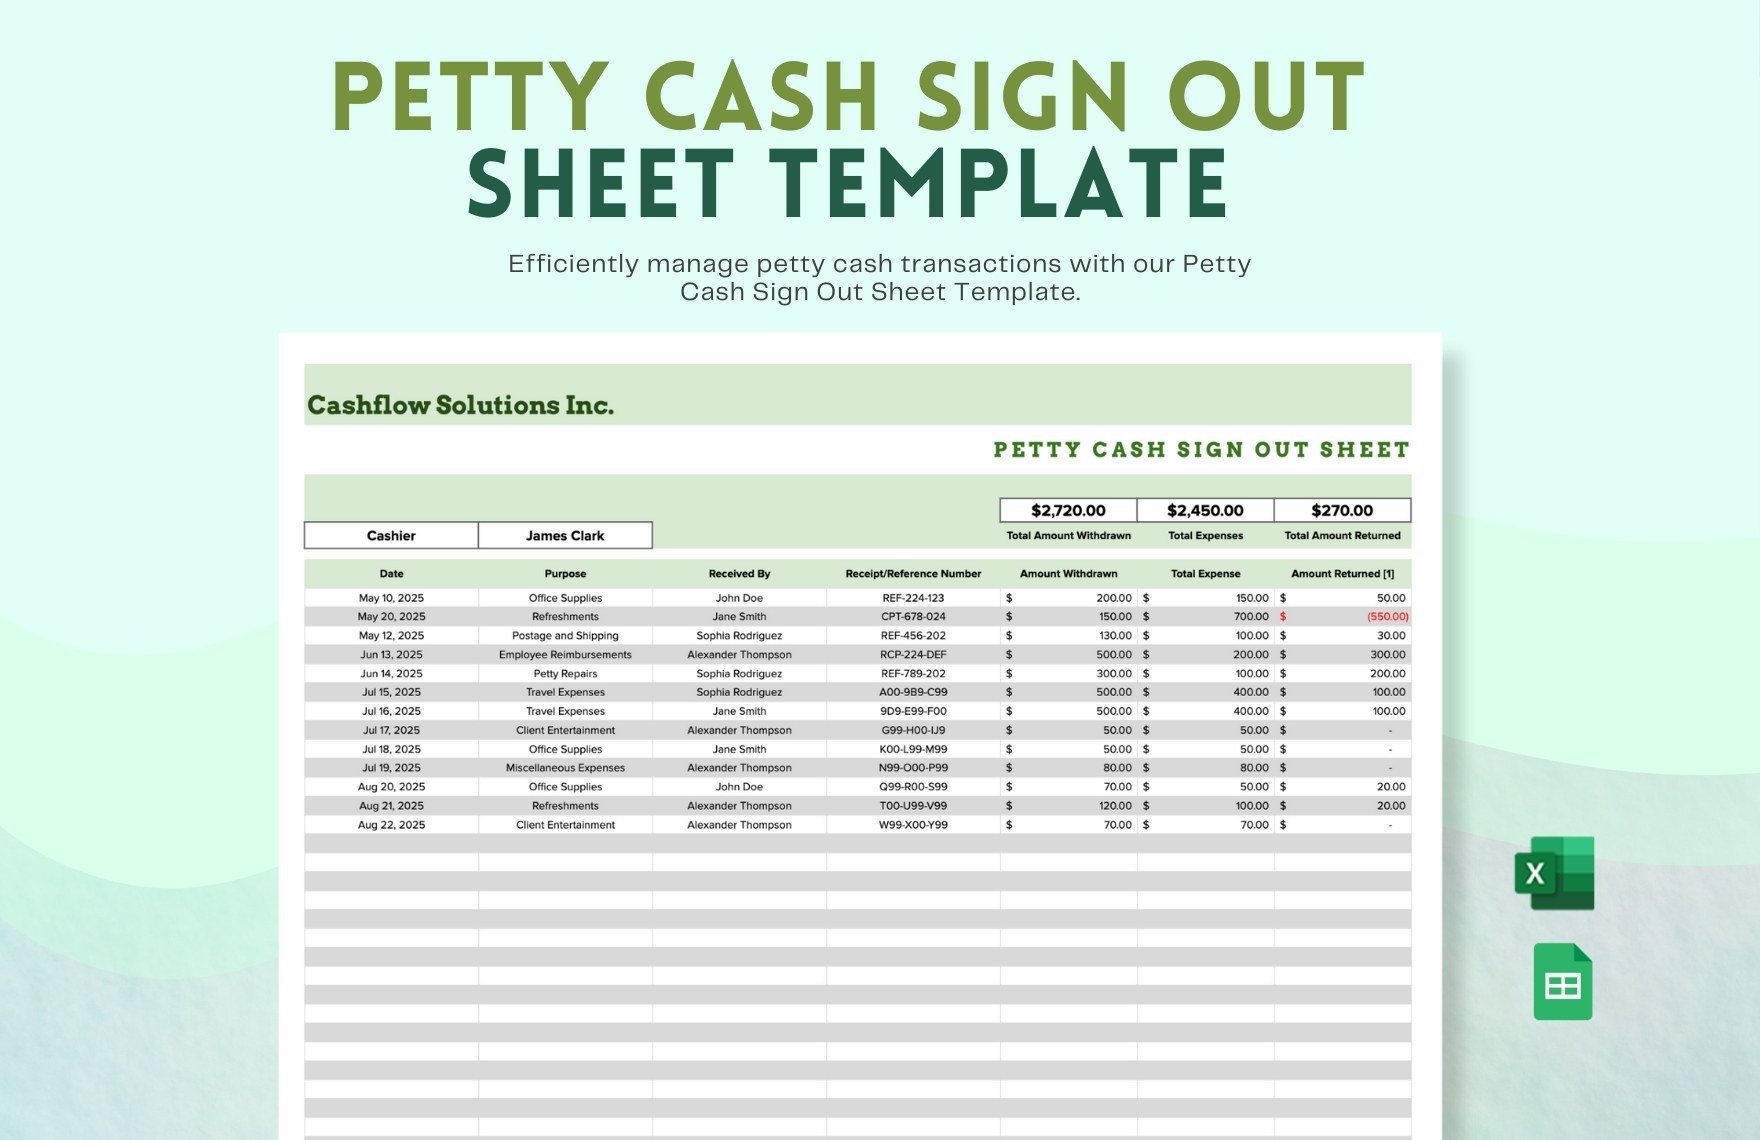 Free Petty Cash Sign Out Sheet Template in Excel, Google Sheets